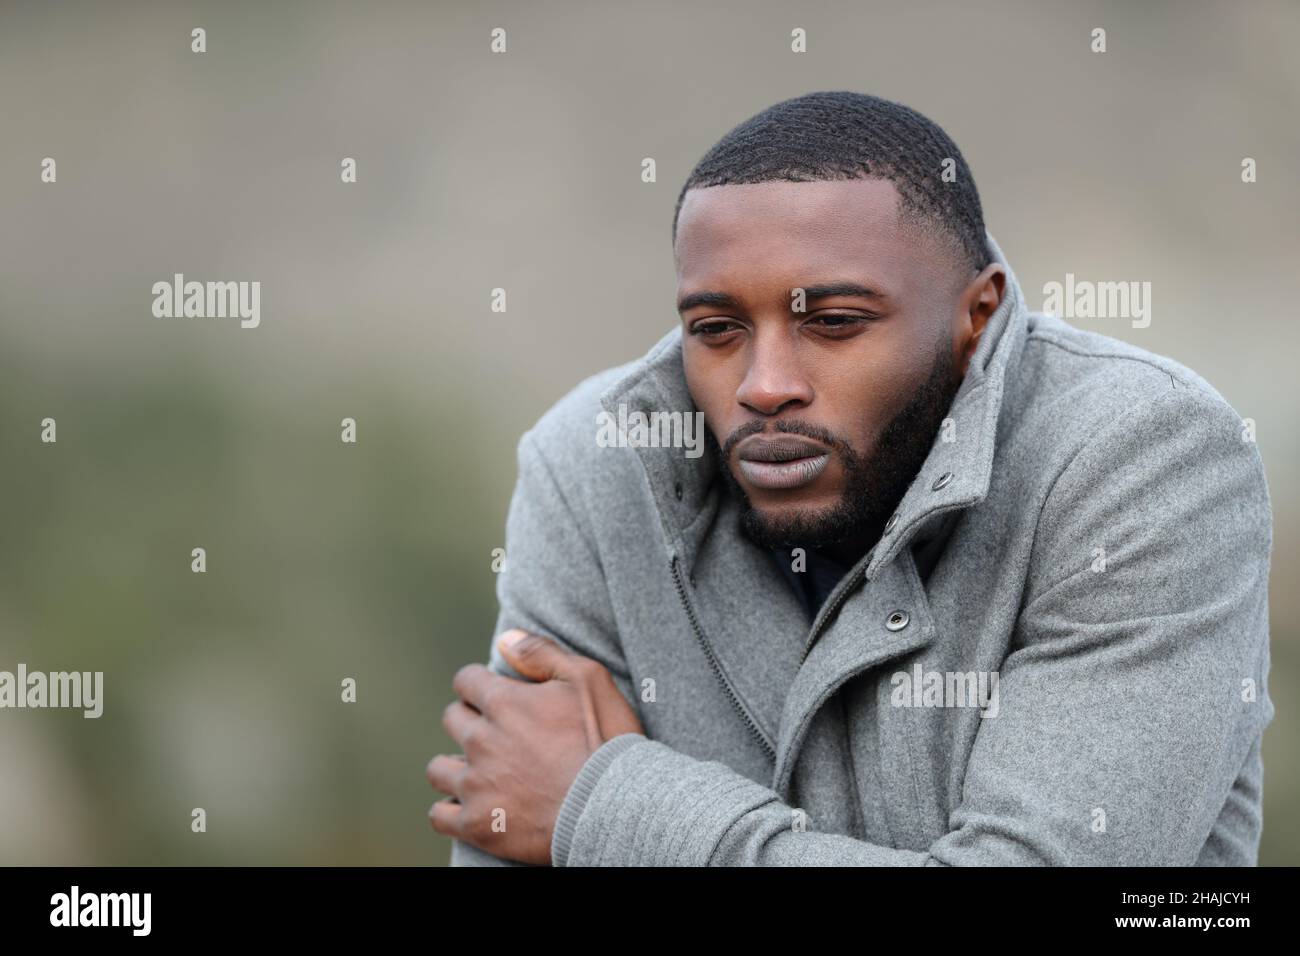 Stressed man with black skin getting cold with a jacket outdoors in winter Stock Photo